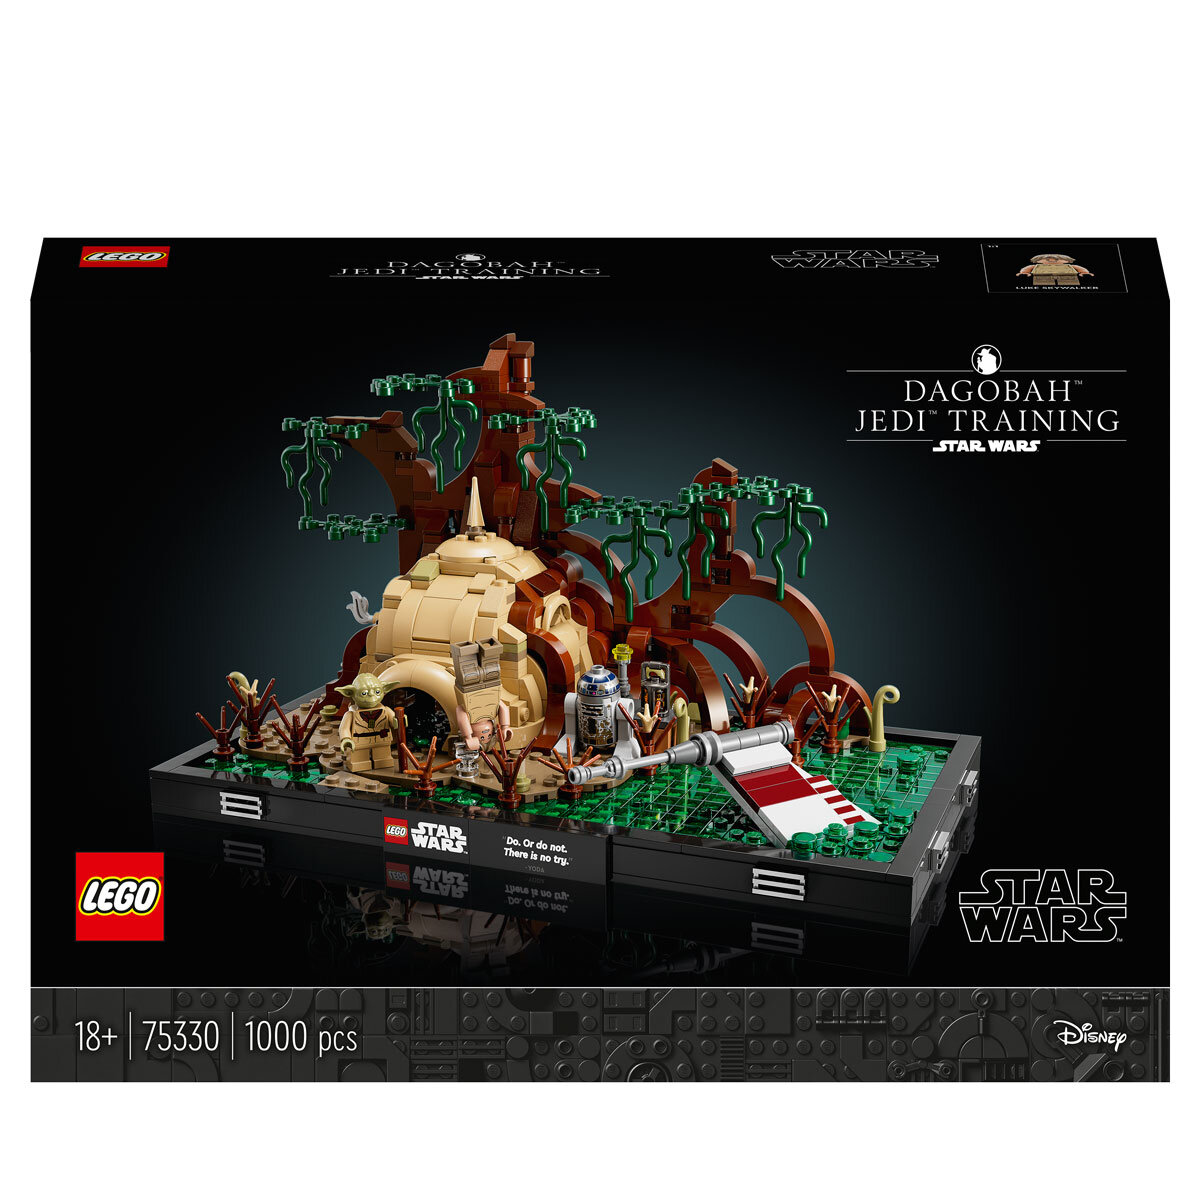 Buy Lego Star Wars Dagobah Jedi Training Front of Box Image at Costco.co.uk